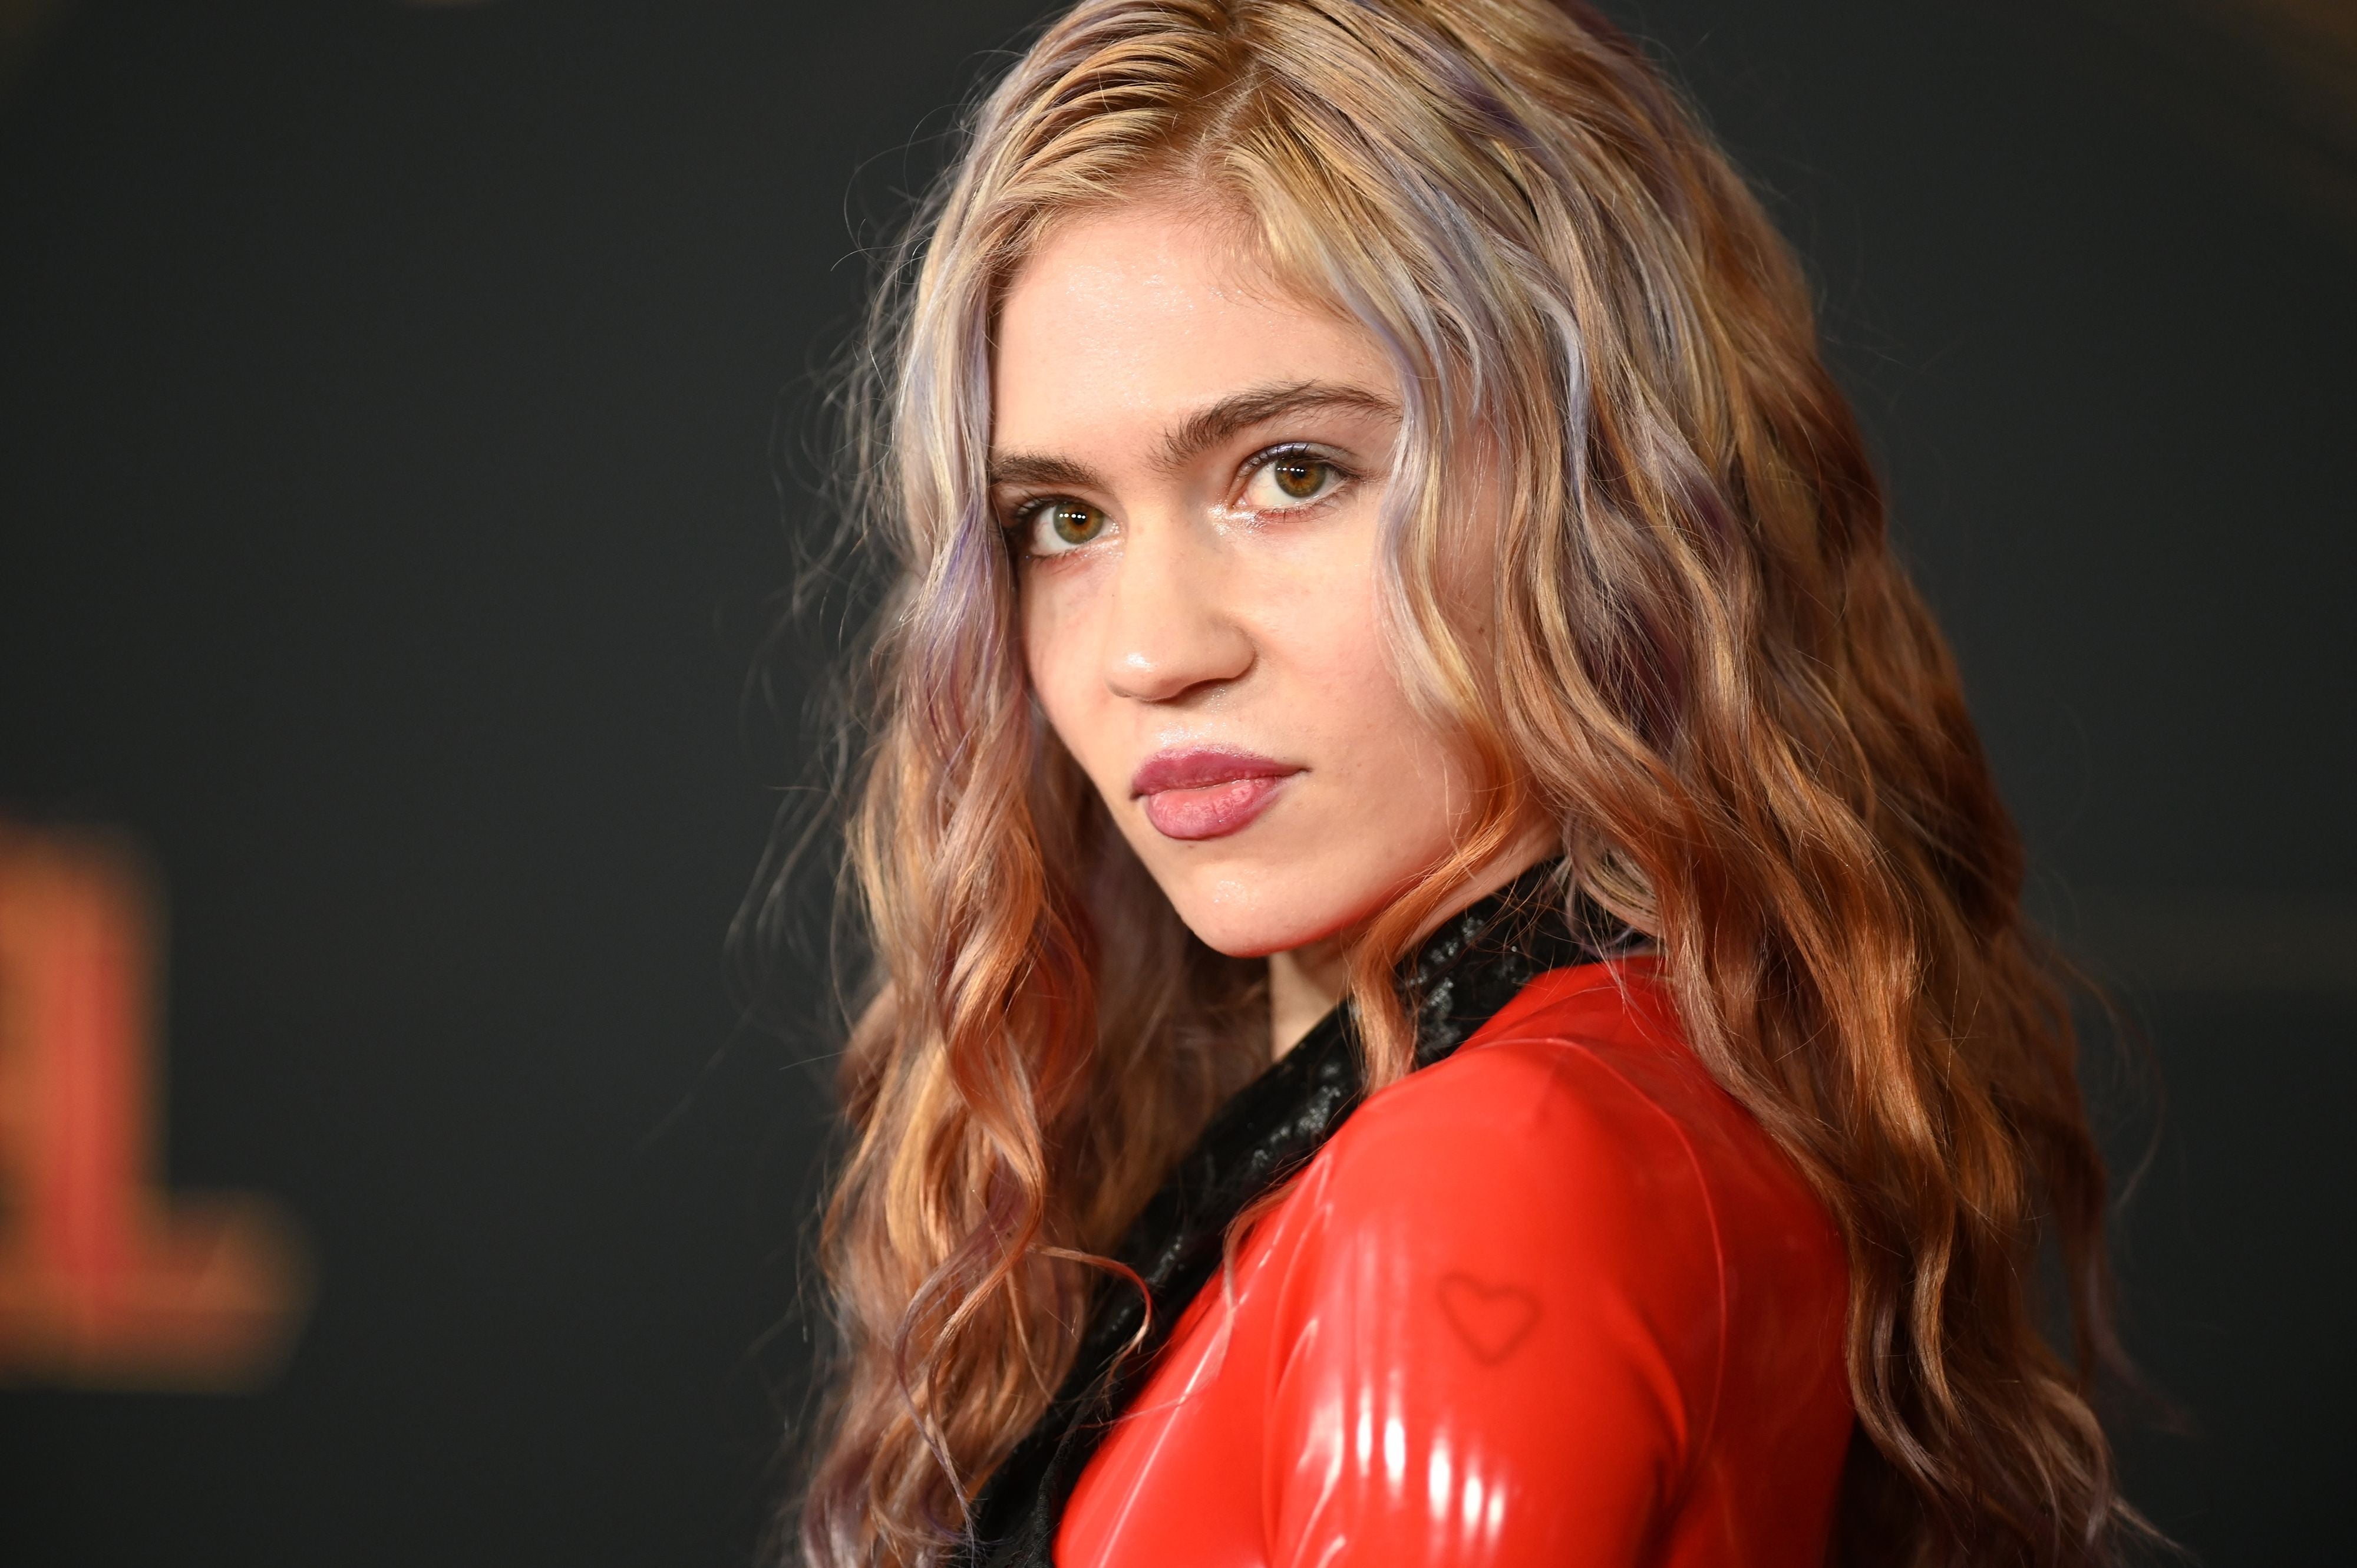 Grimes is one of the artists to get ahead in the NFT game